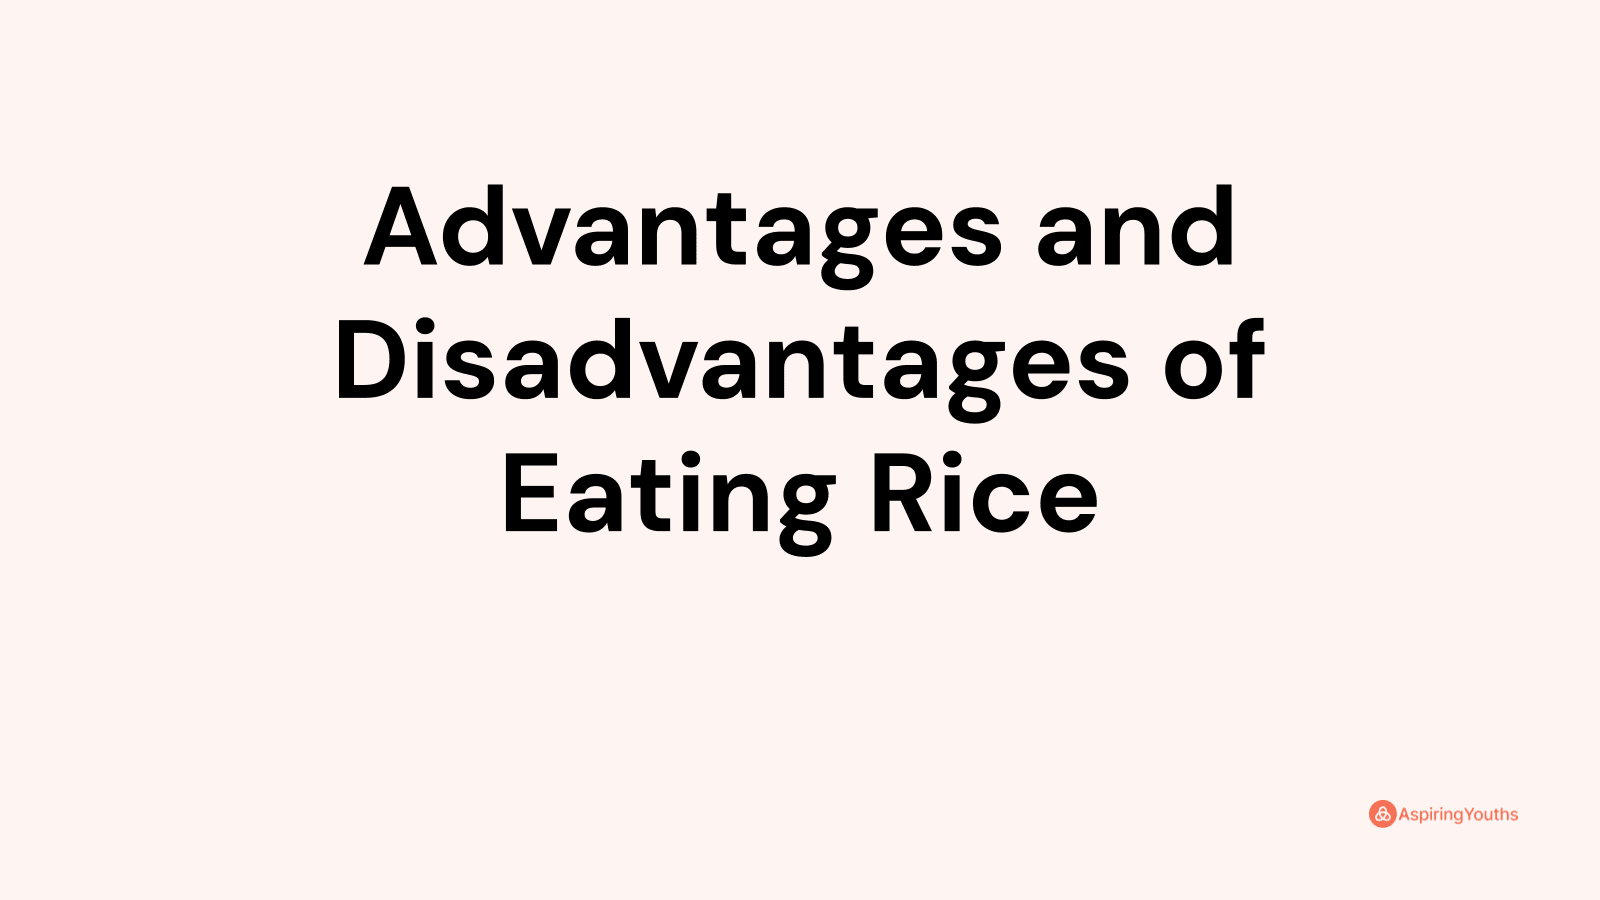 Advantages and disadvantages of Eating Rice